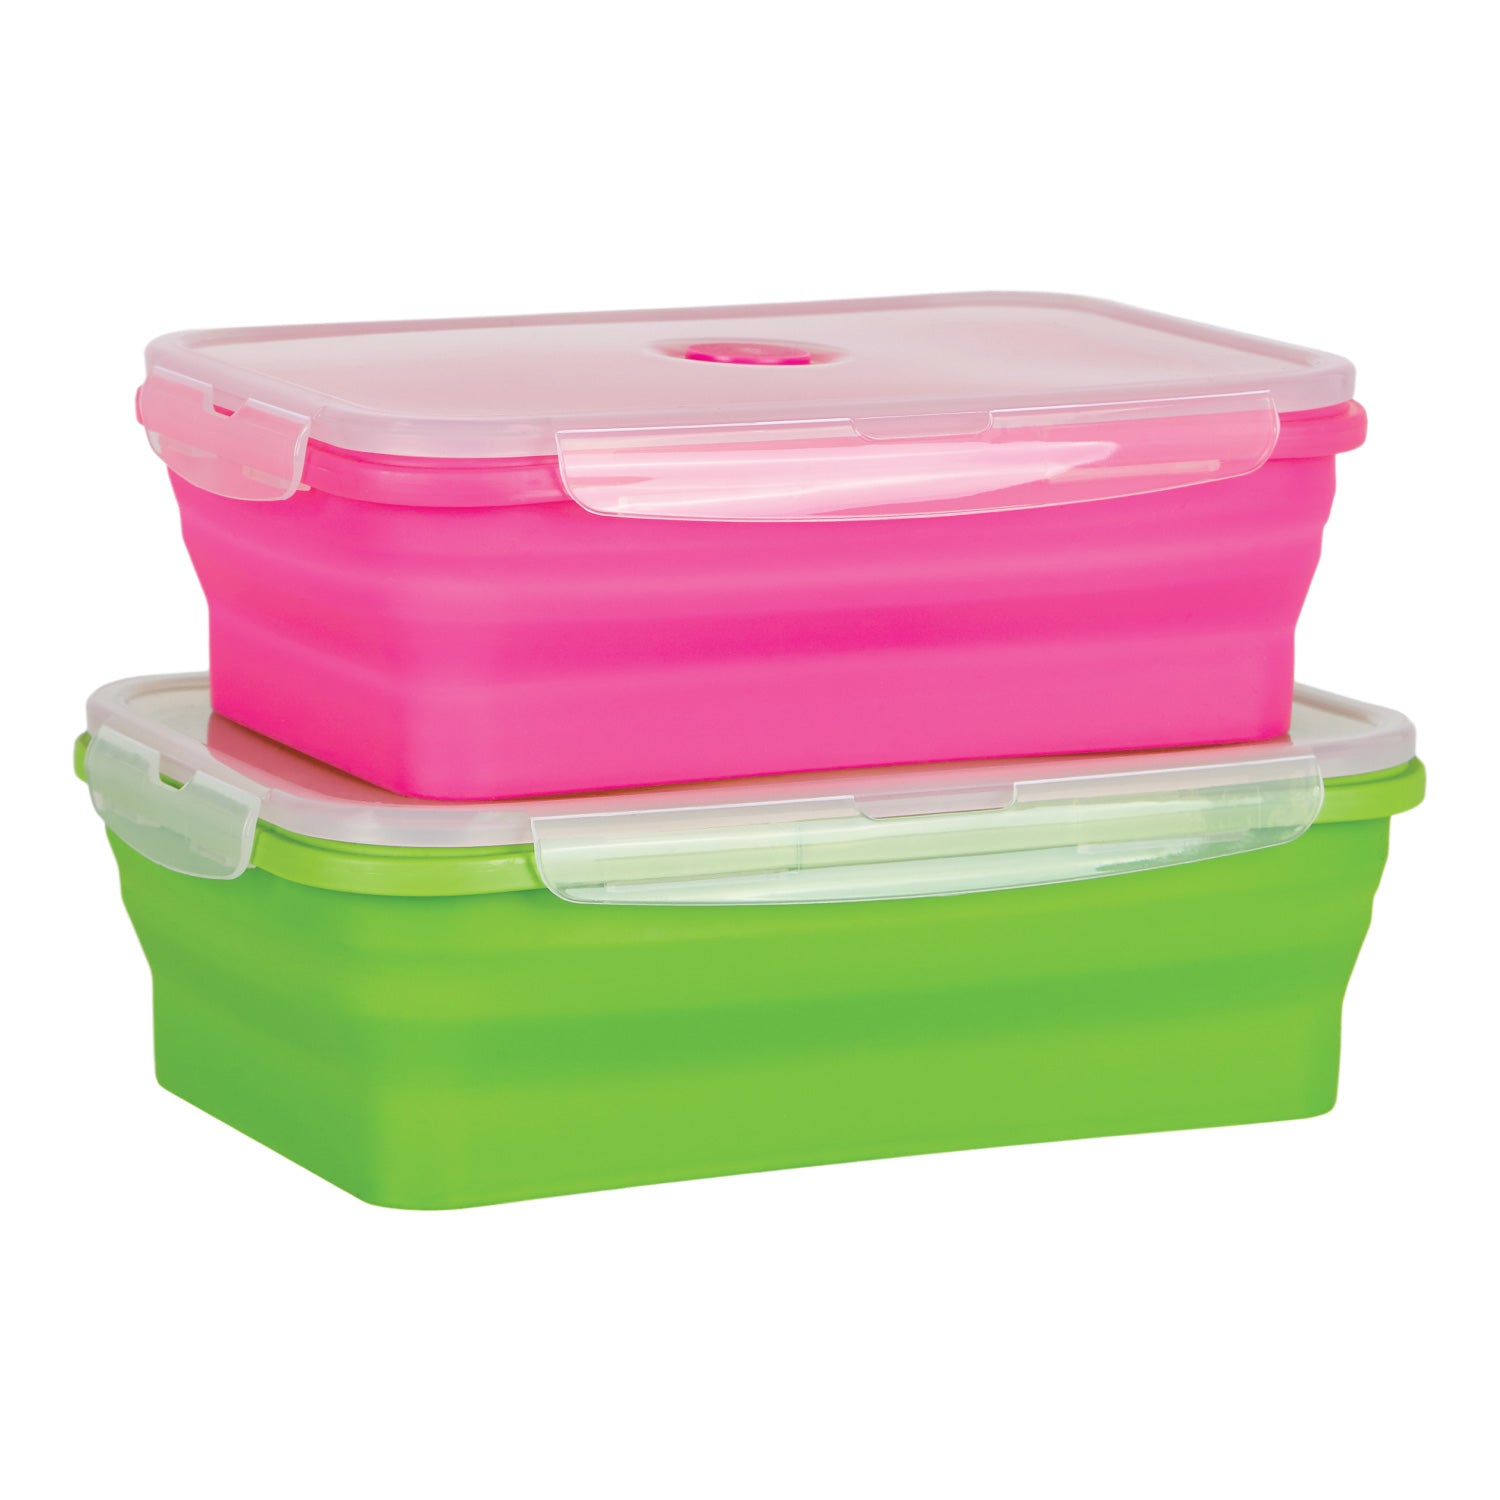 VIGIND vigind collapsible silicone food storage containers,flat stacks  collapsible storage containers/bowls sets for kitchen/camping